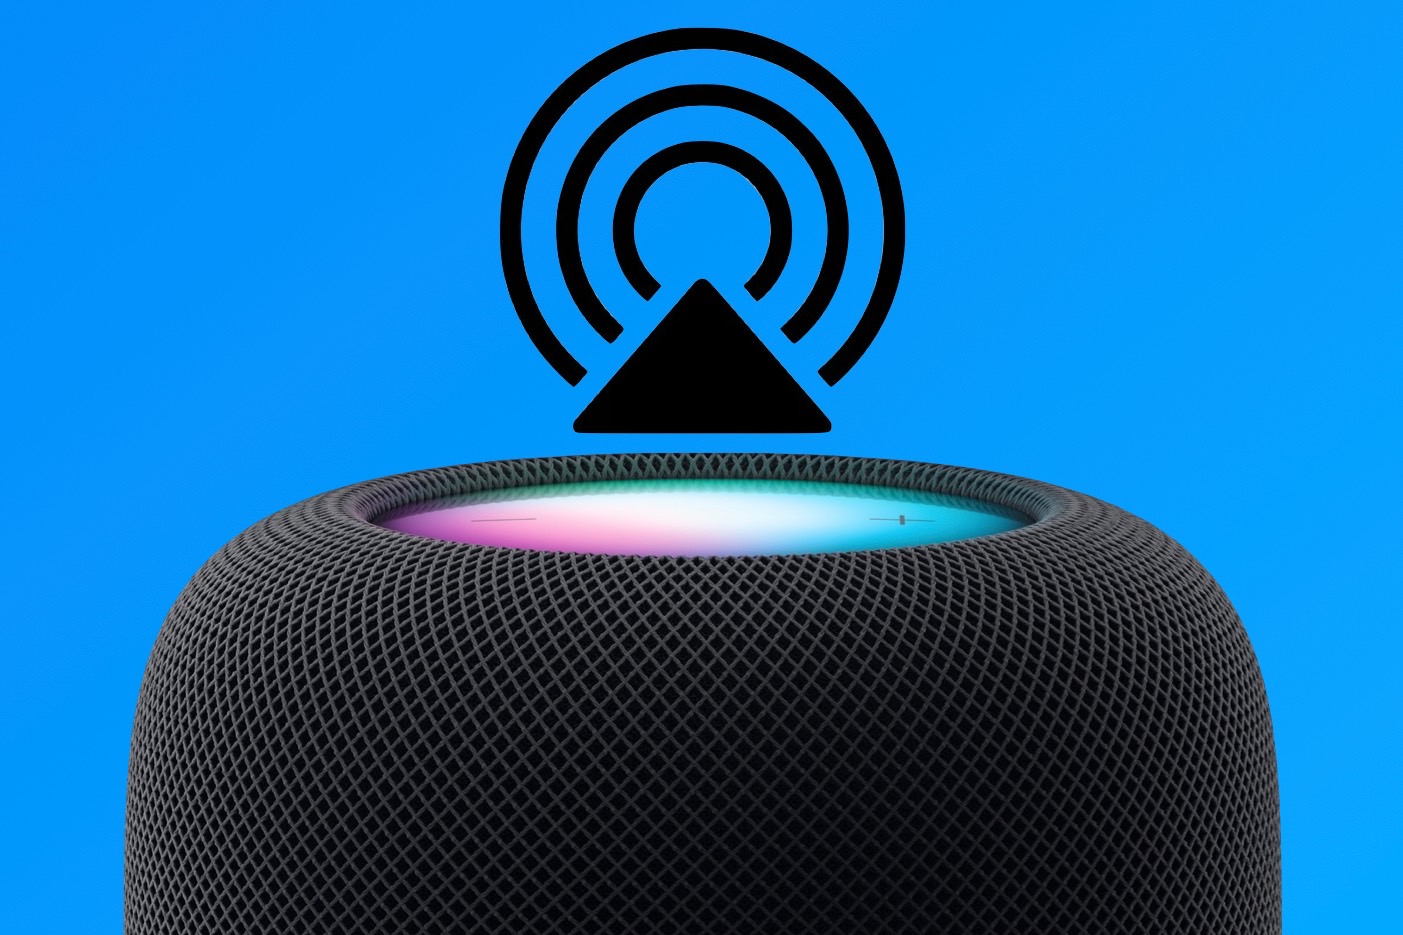 Apple AirPlay supports 24-bit lossless audio but you can't use it